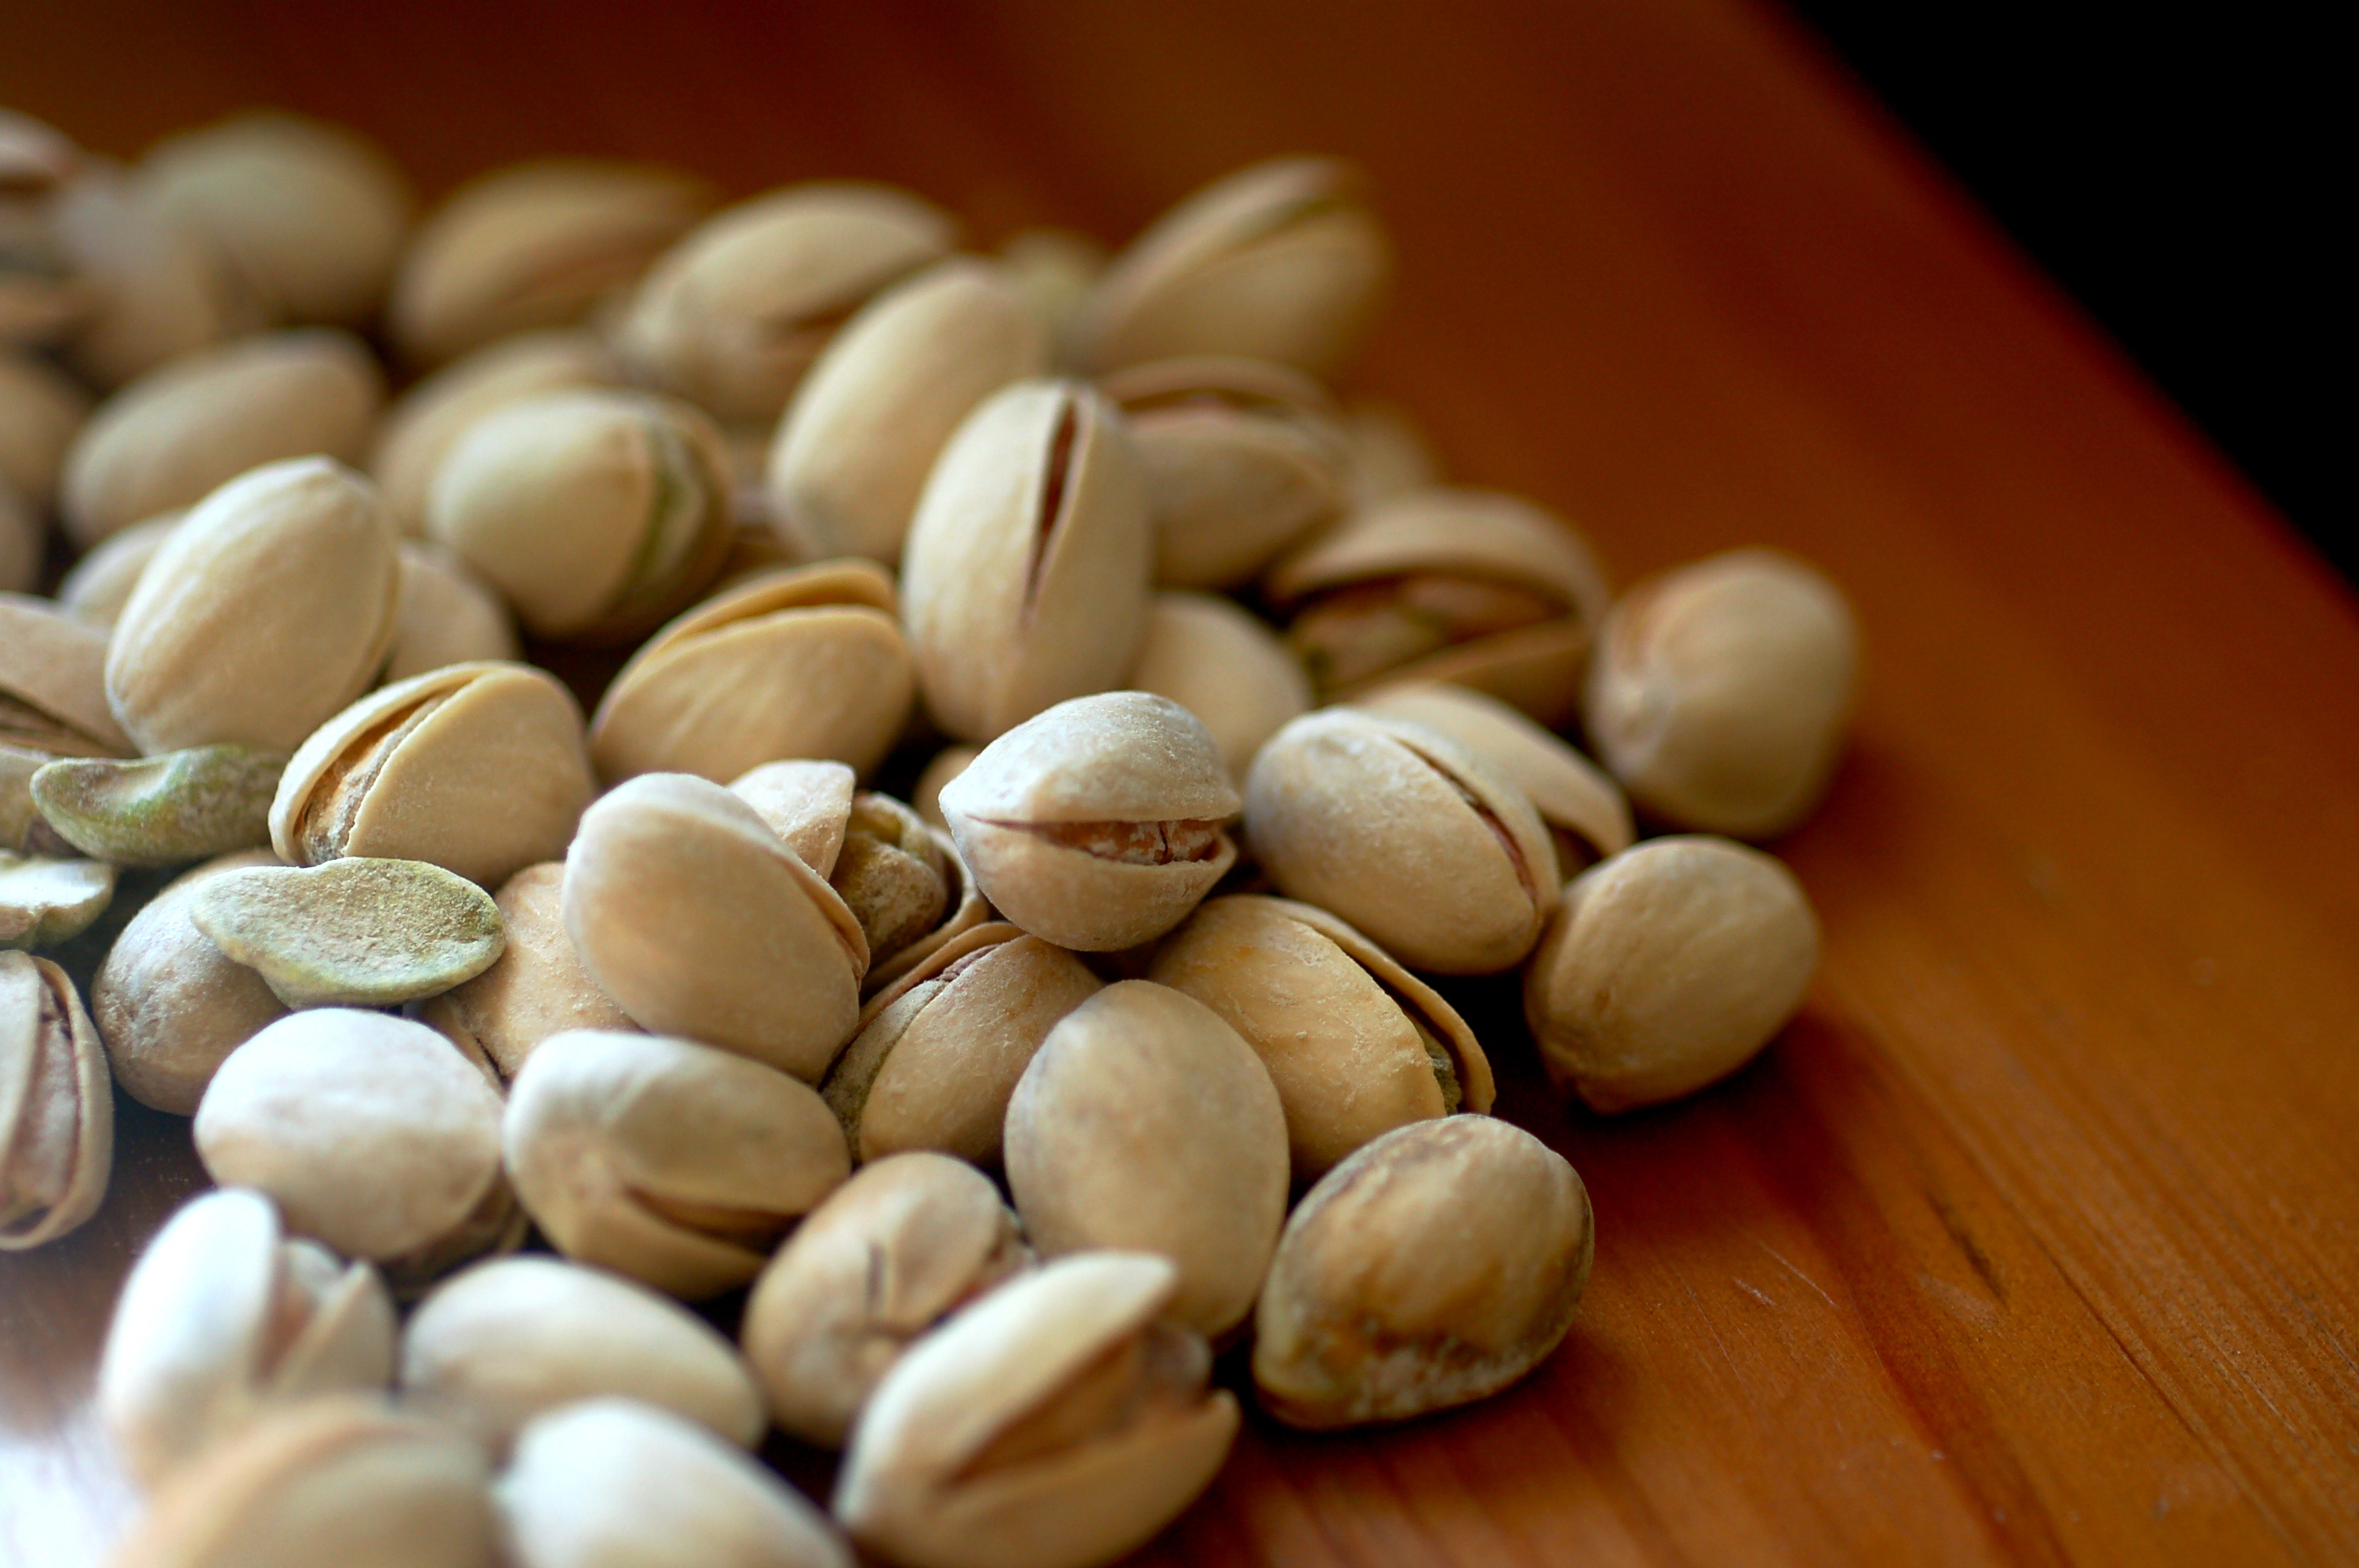 Caught red-handed – pistachios health perks | Enlightened Eater